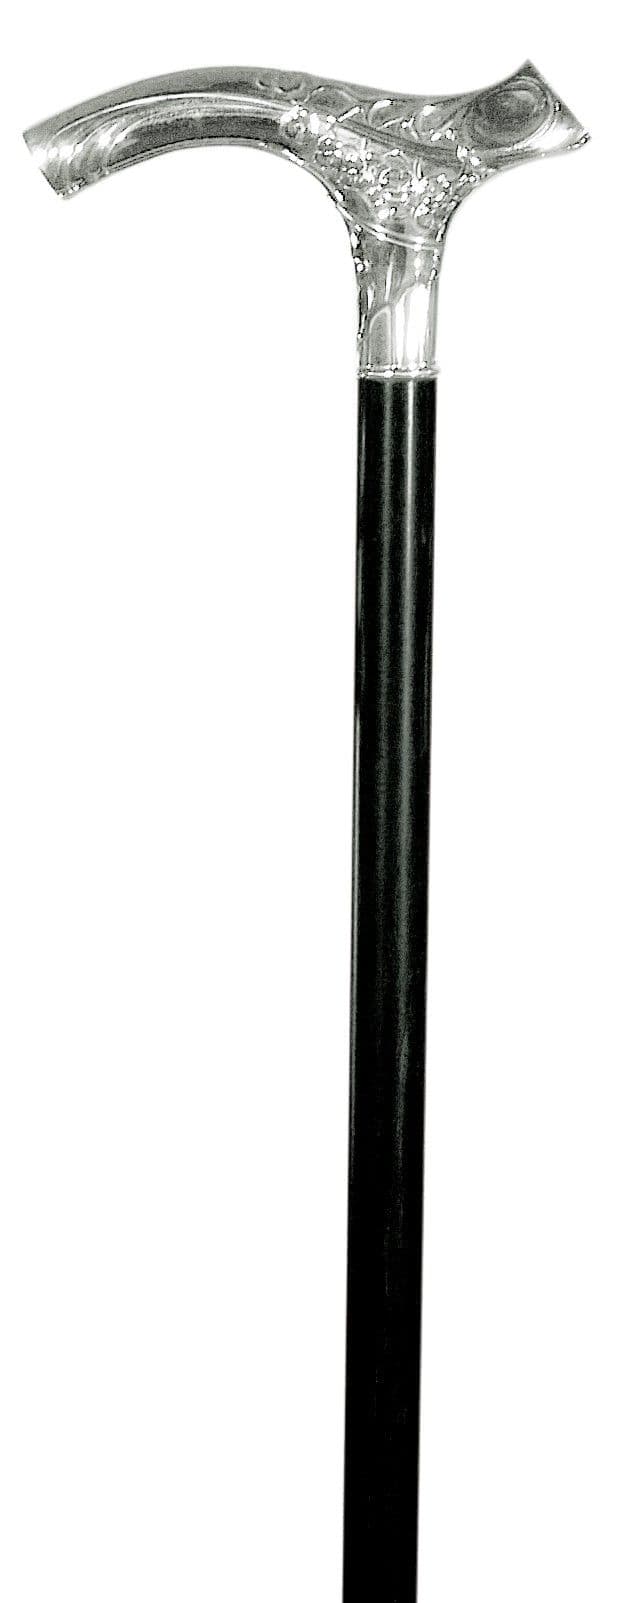 Classic Canes Silver-plated patterned crutch